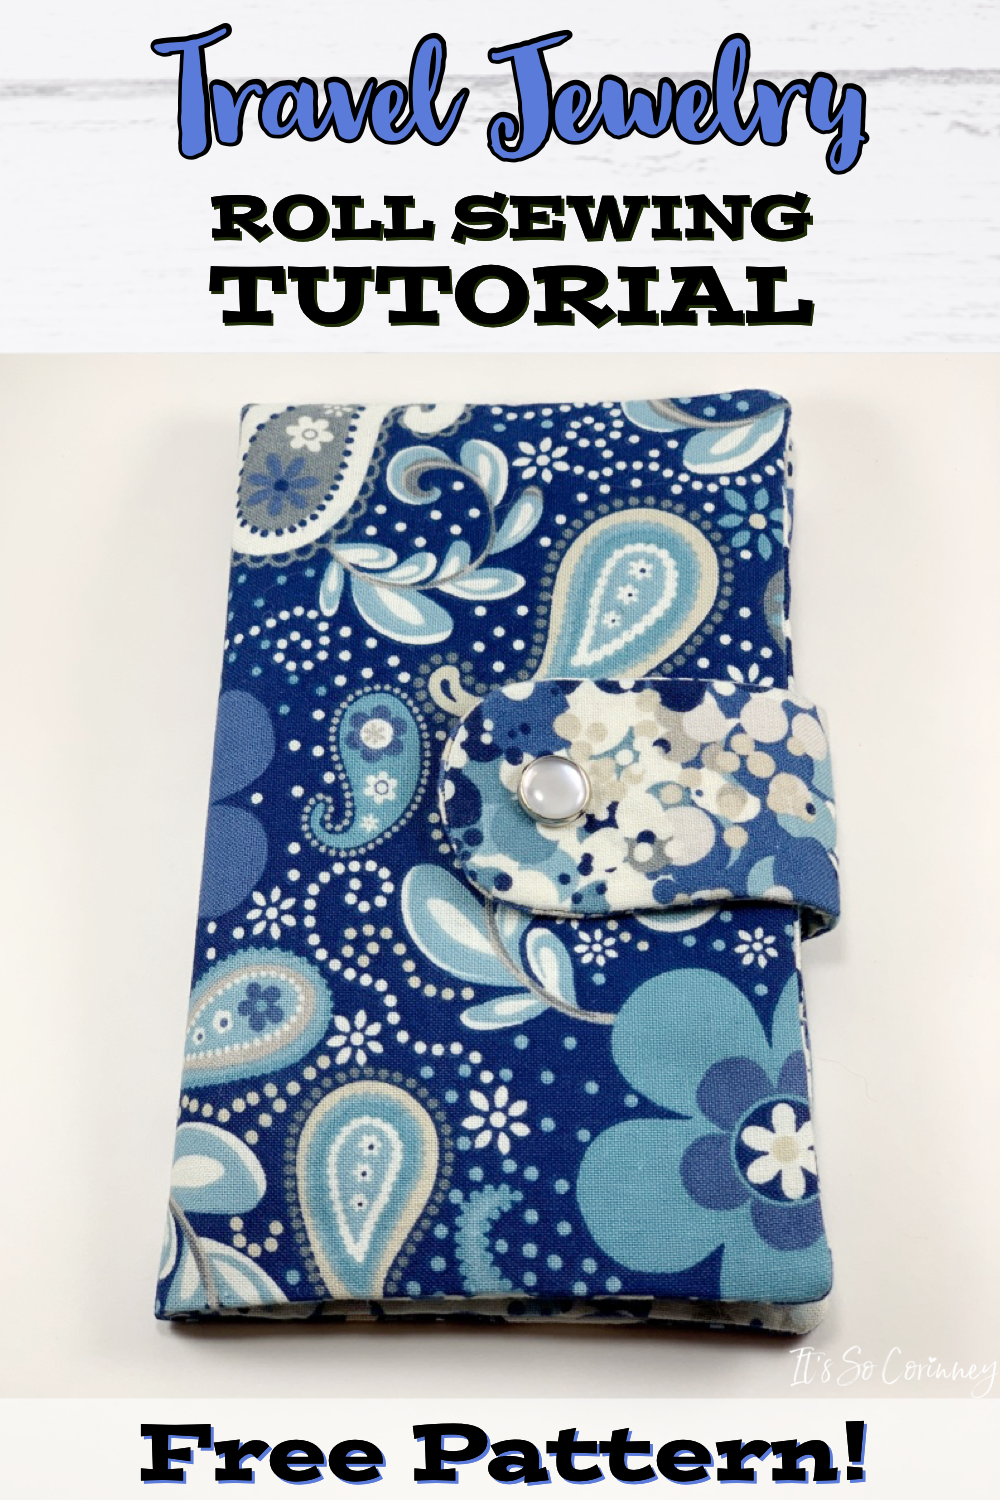 Travel Jewelry Roll Sewing Tutorial